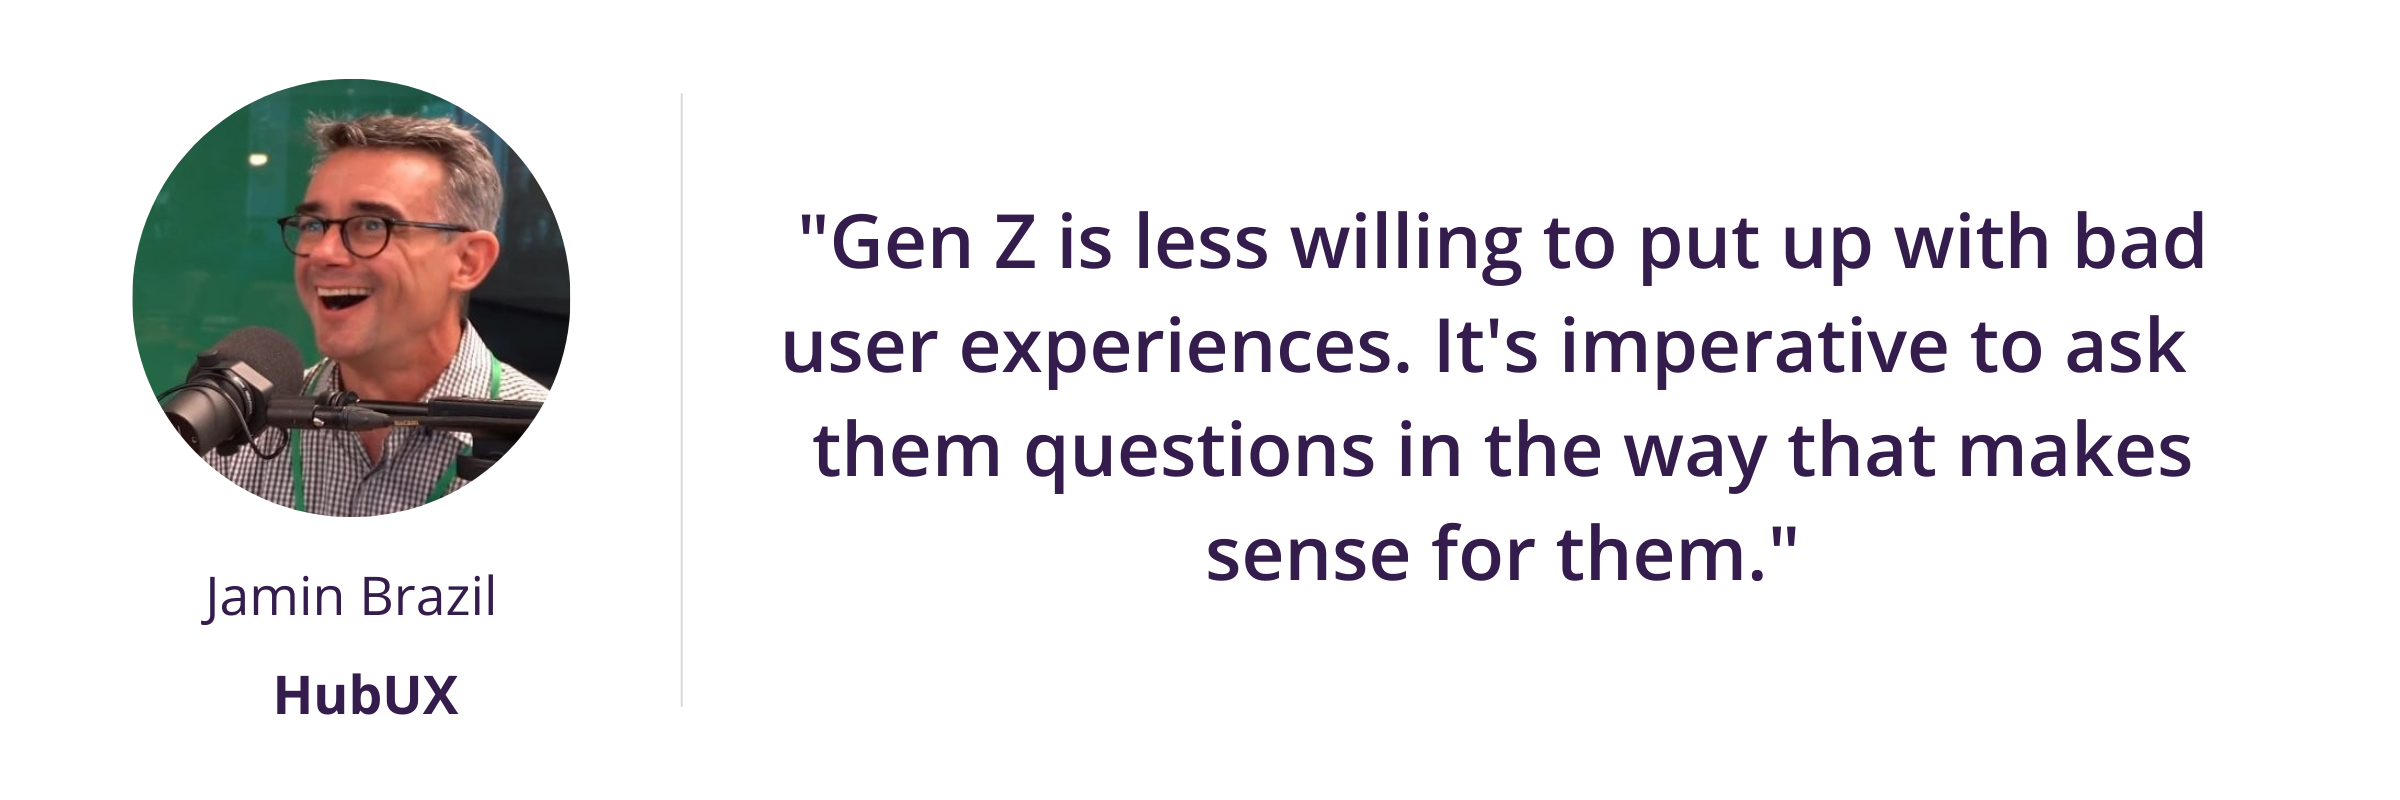 "Gen Z is less willing to put up with bad user experiences. It's imperative to ask them questions in the way that makes sense for them."